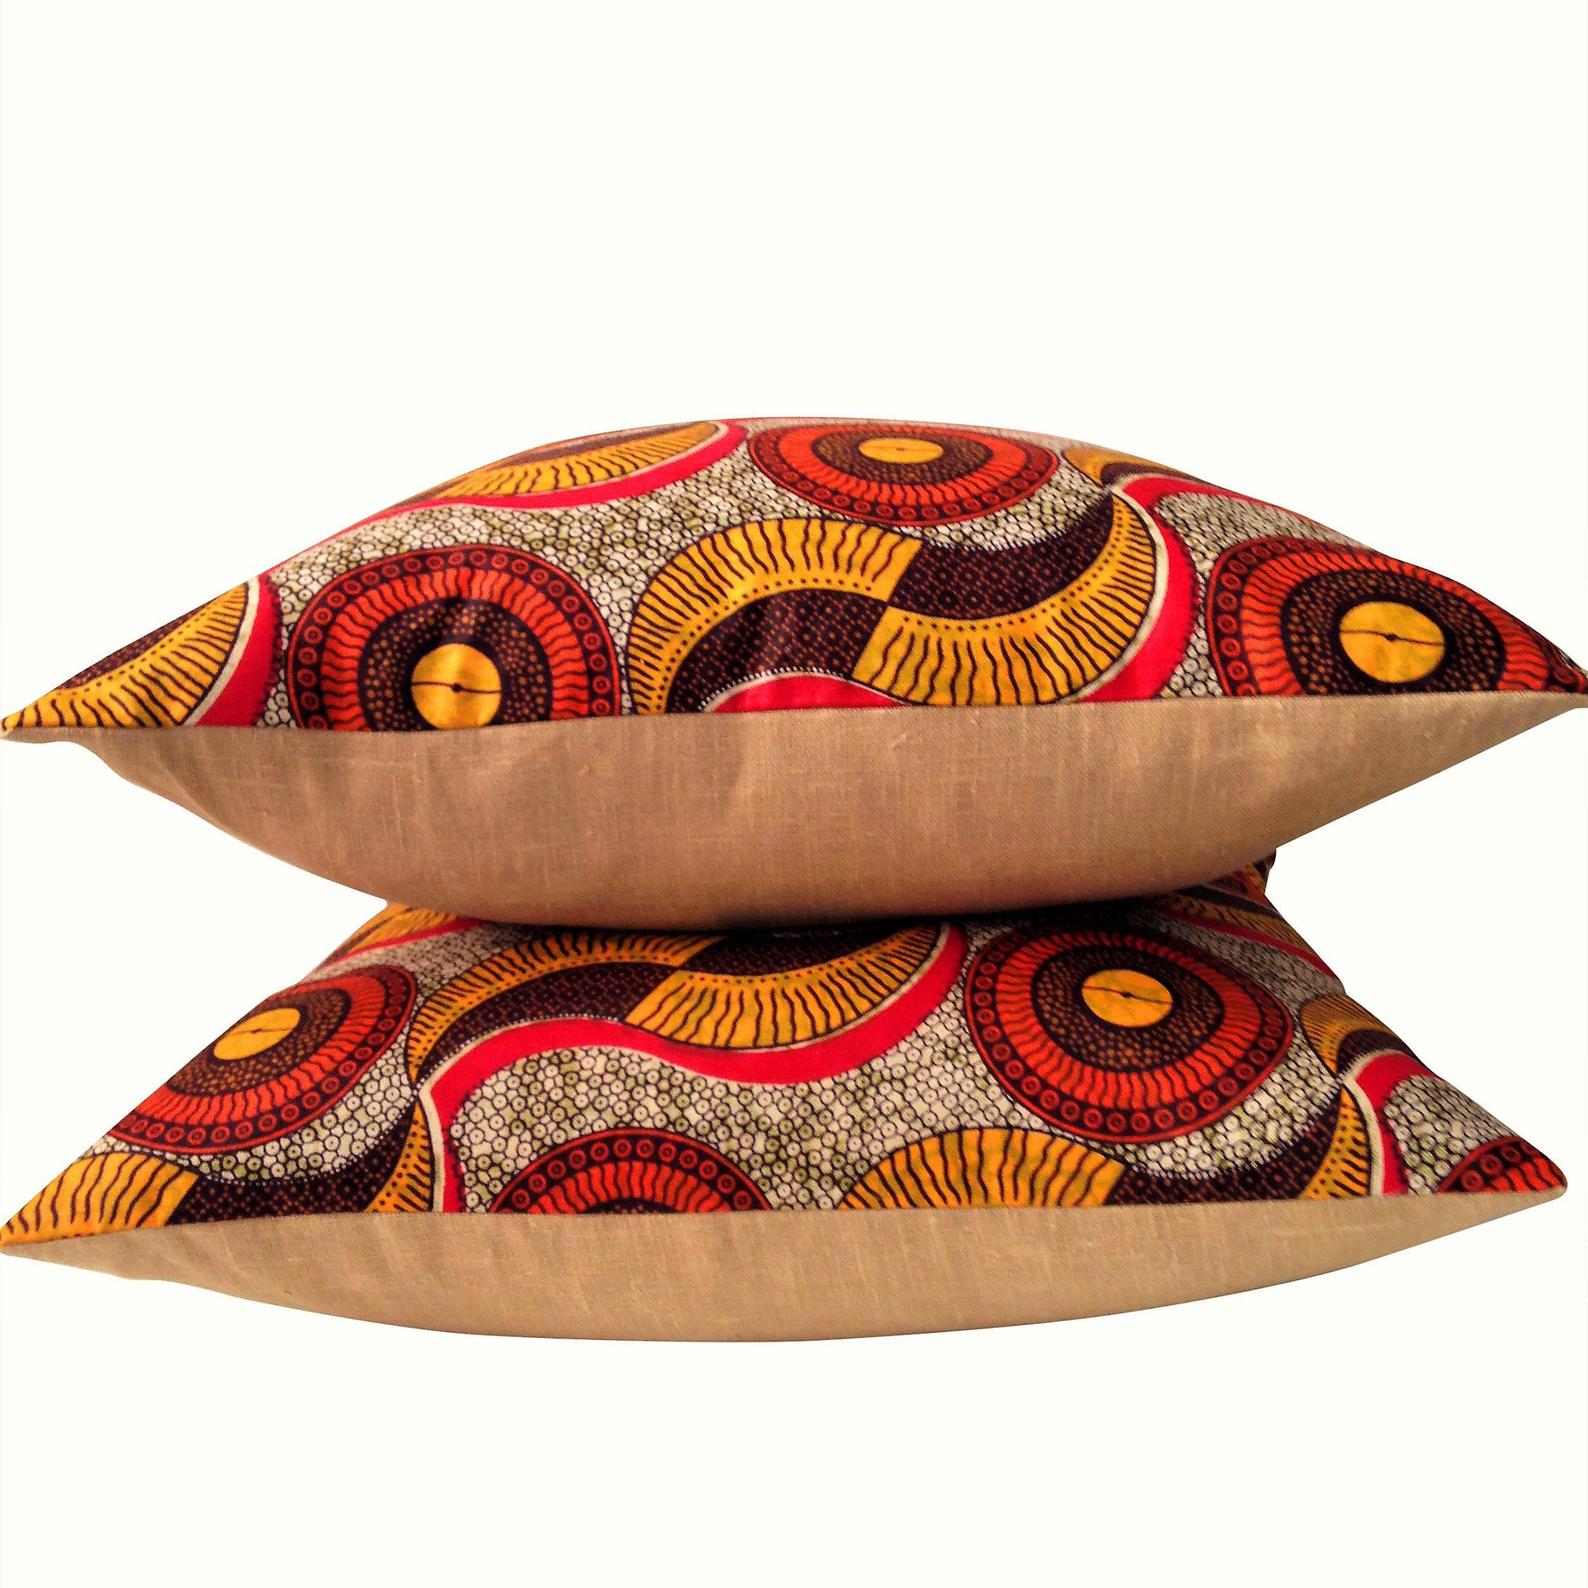 Fill Your Home With Stunning African Décor This Holiday Season